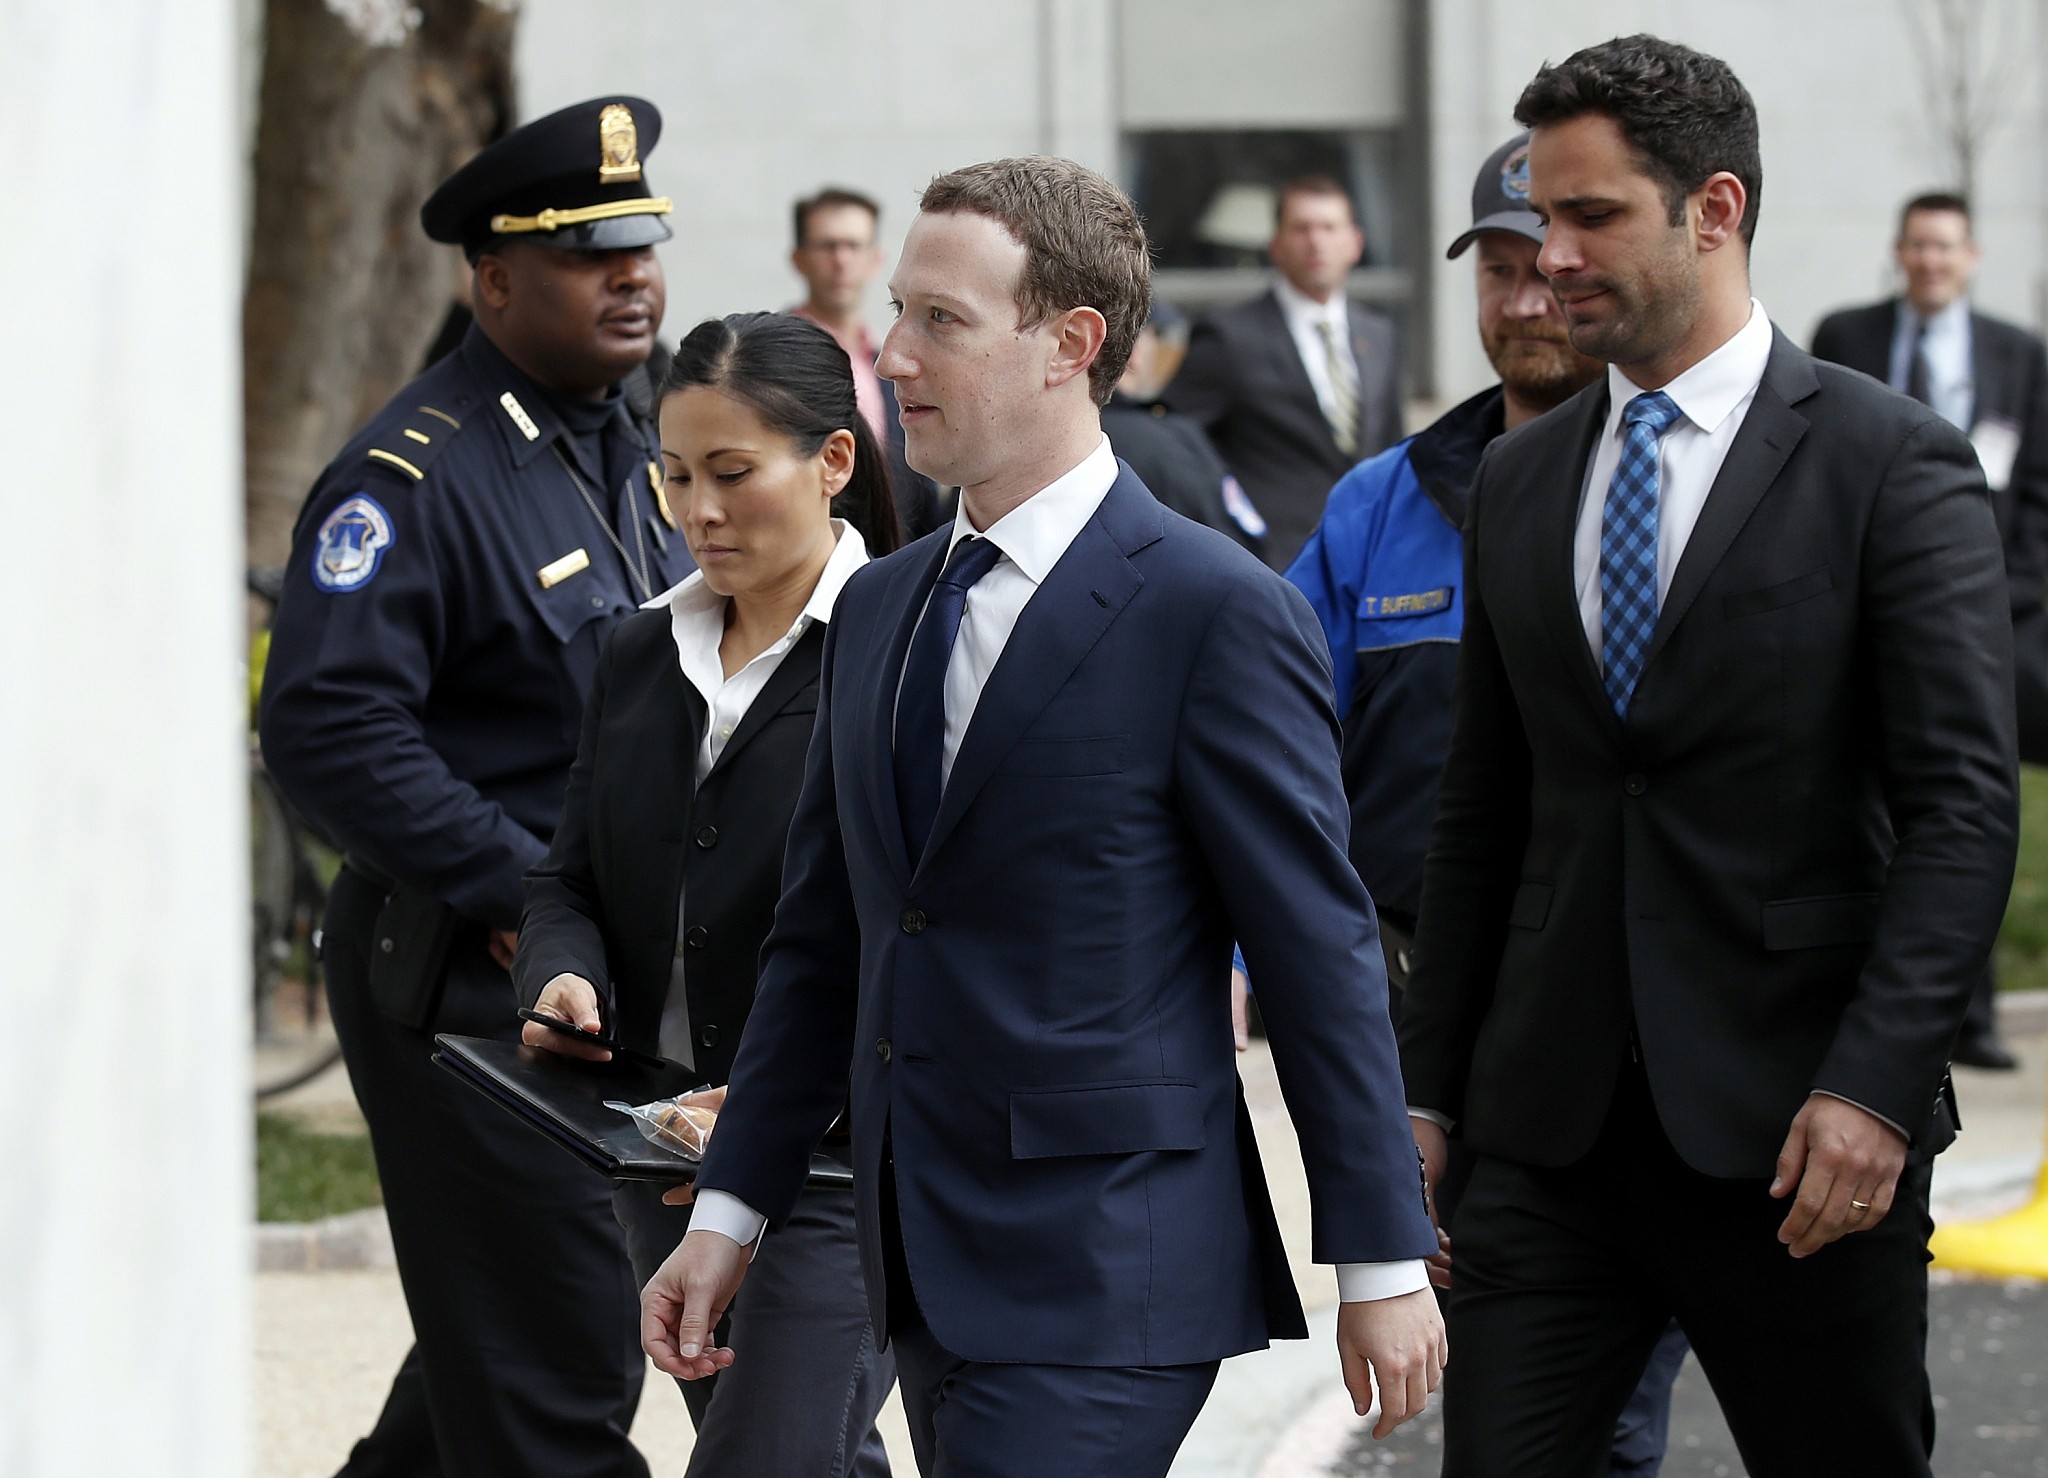 Closer Look at Mark Zuckerberg's Personal Security Expenditure